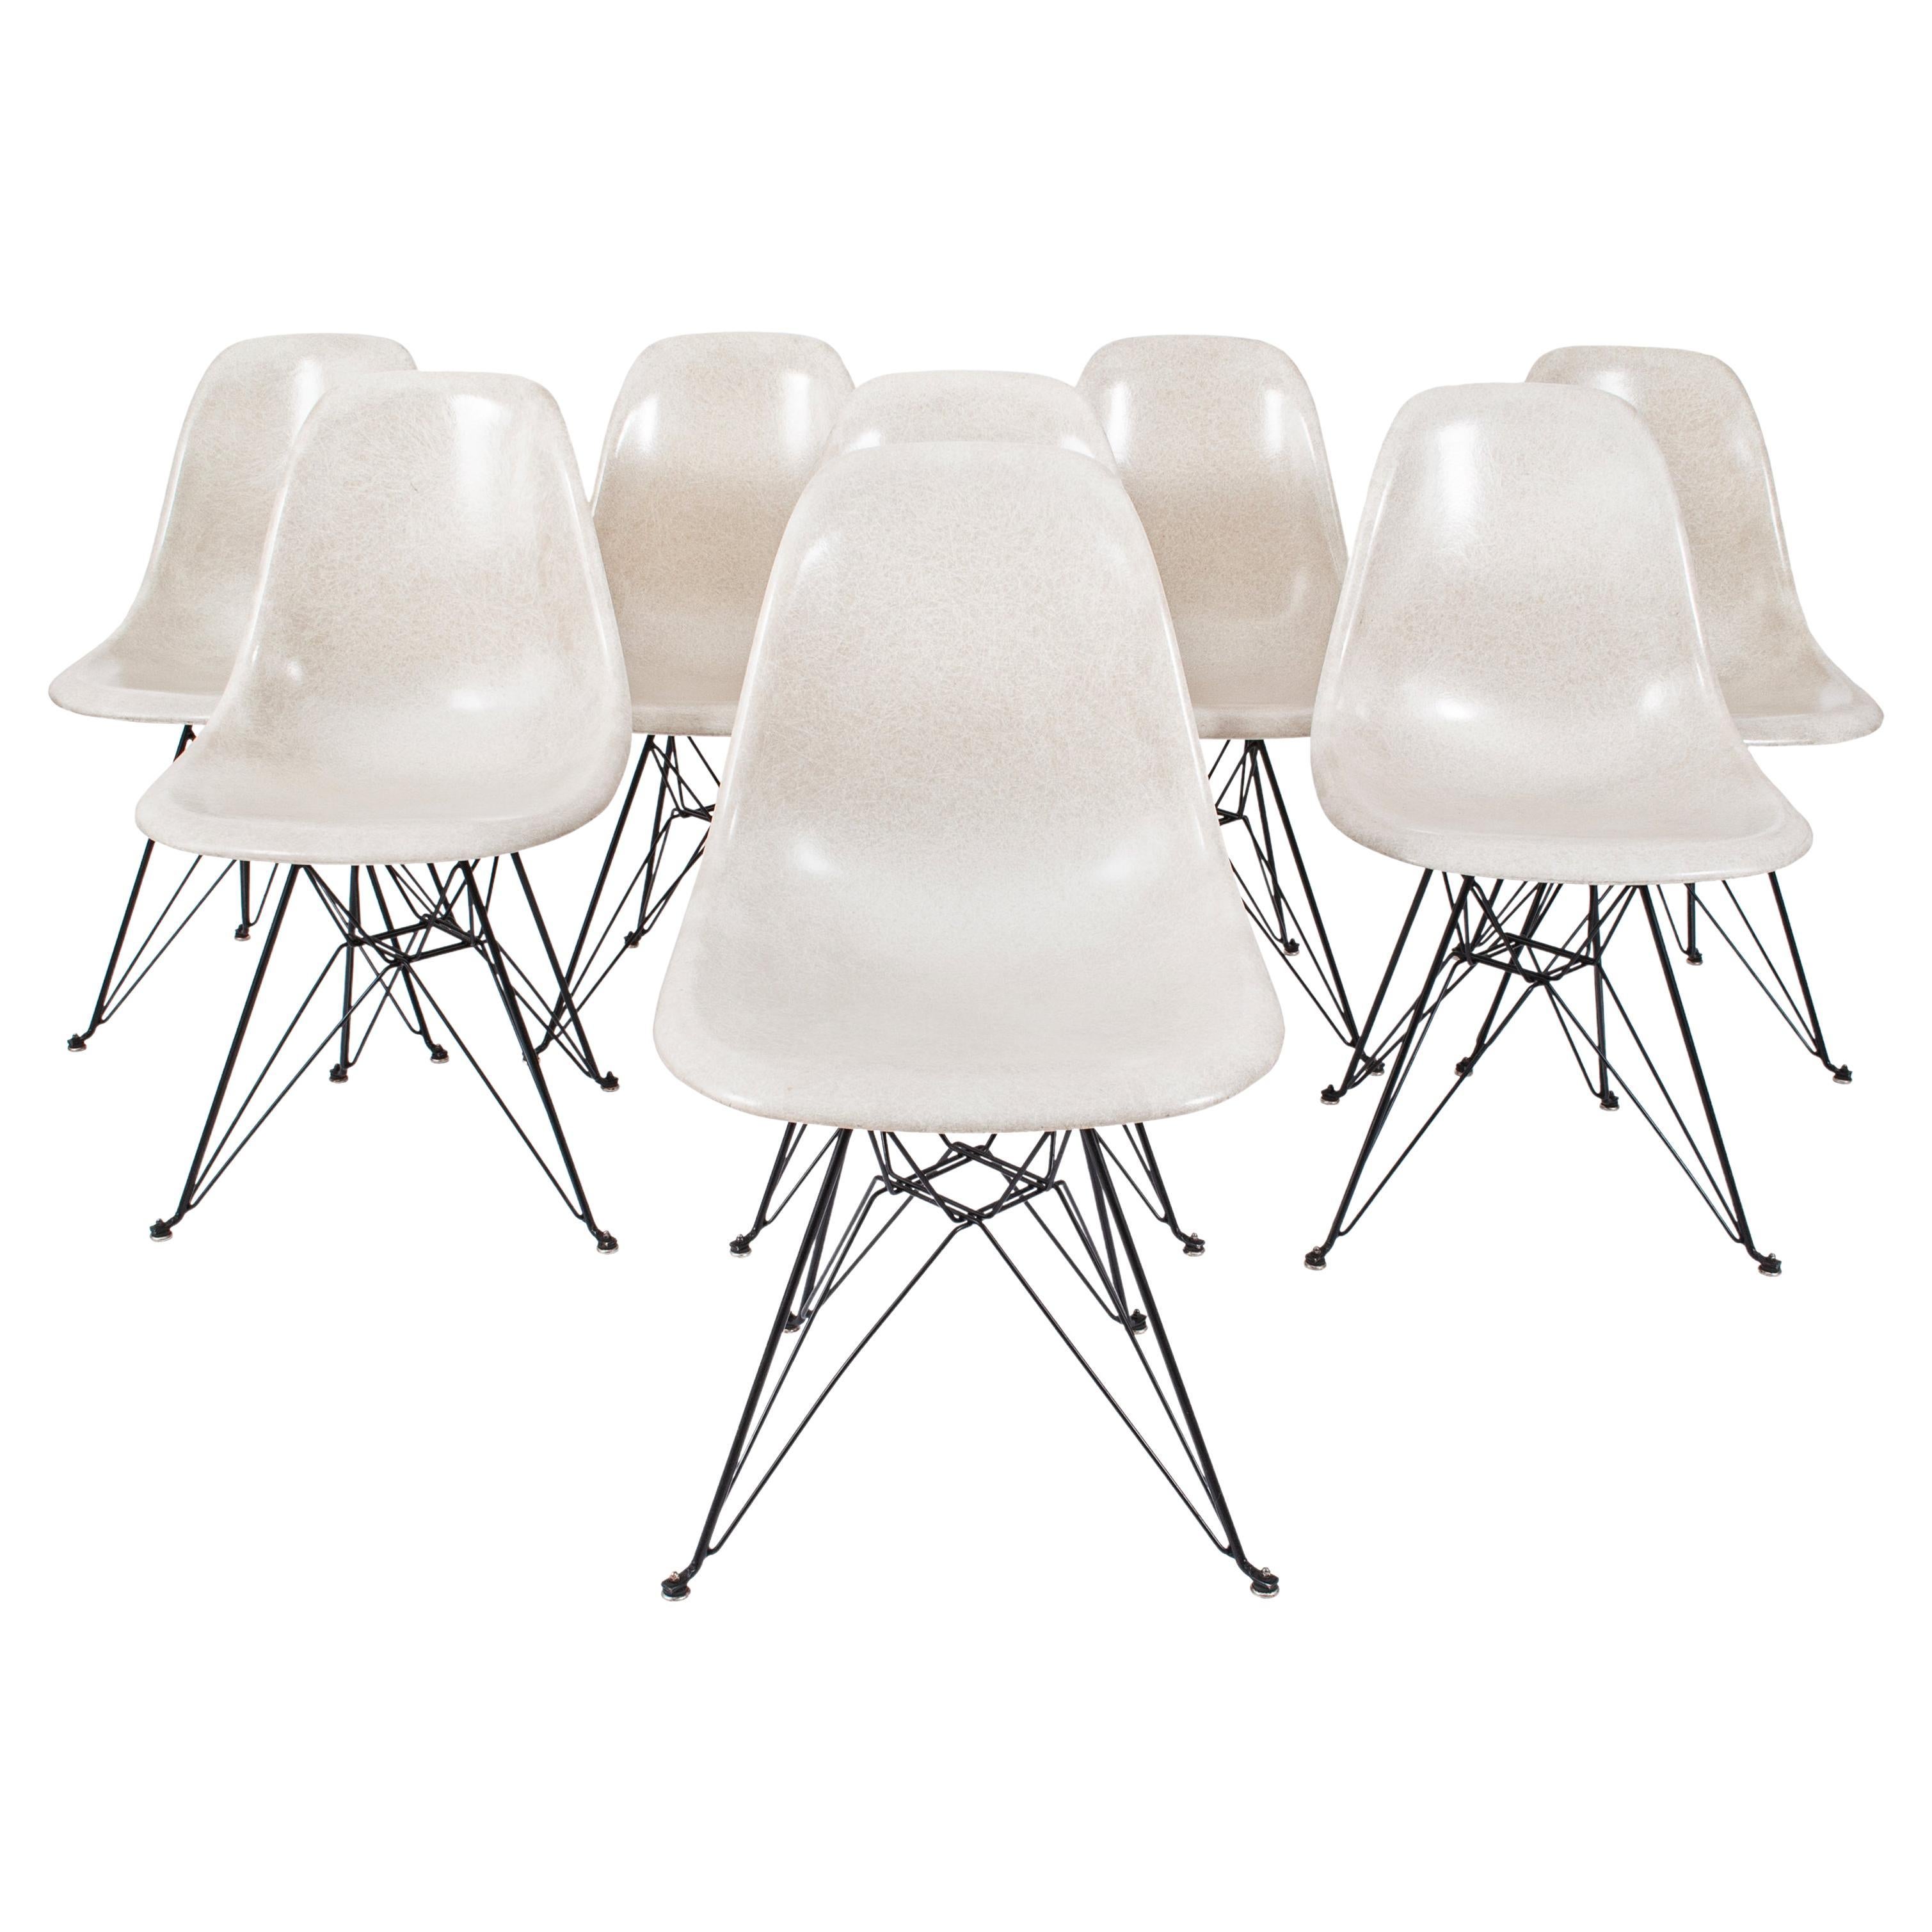 Set 8 Mid-Century Modern Eames Modernica Shell Dining Chairs Eiffel Tower Base